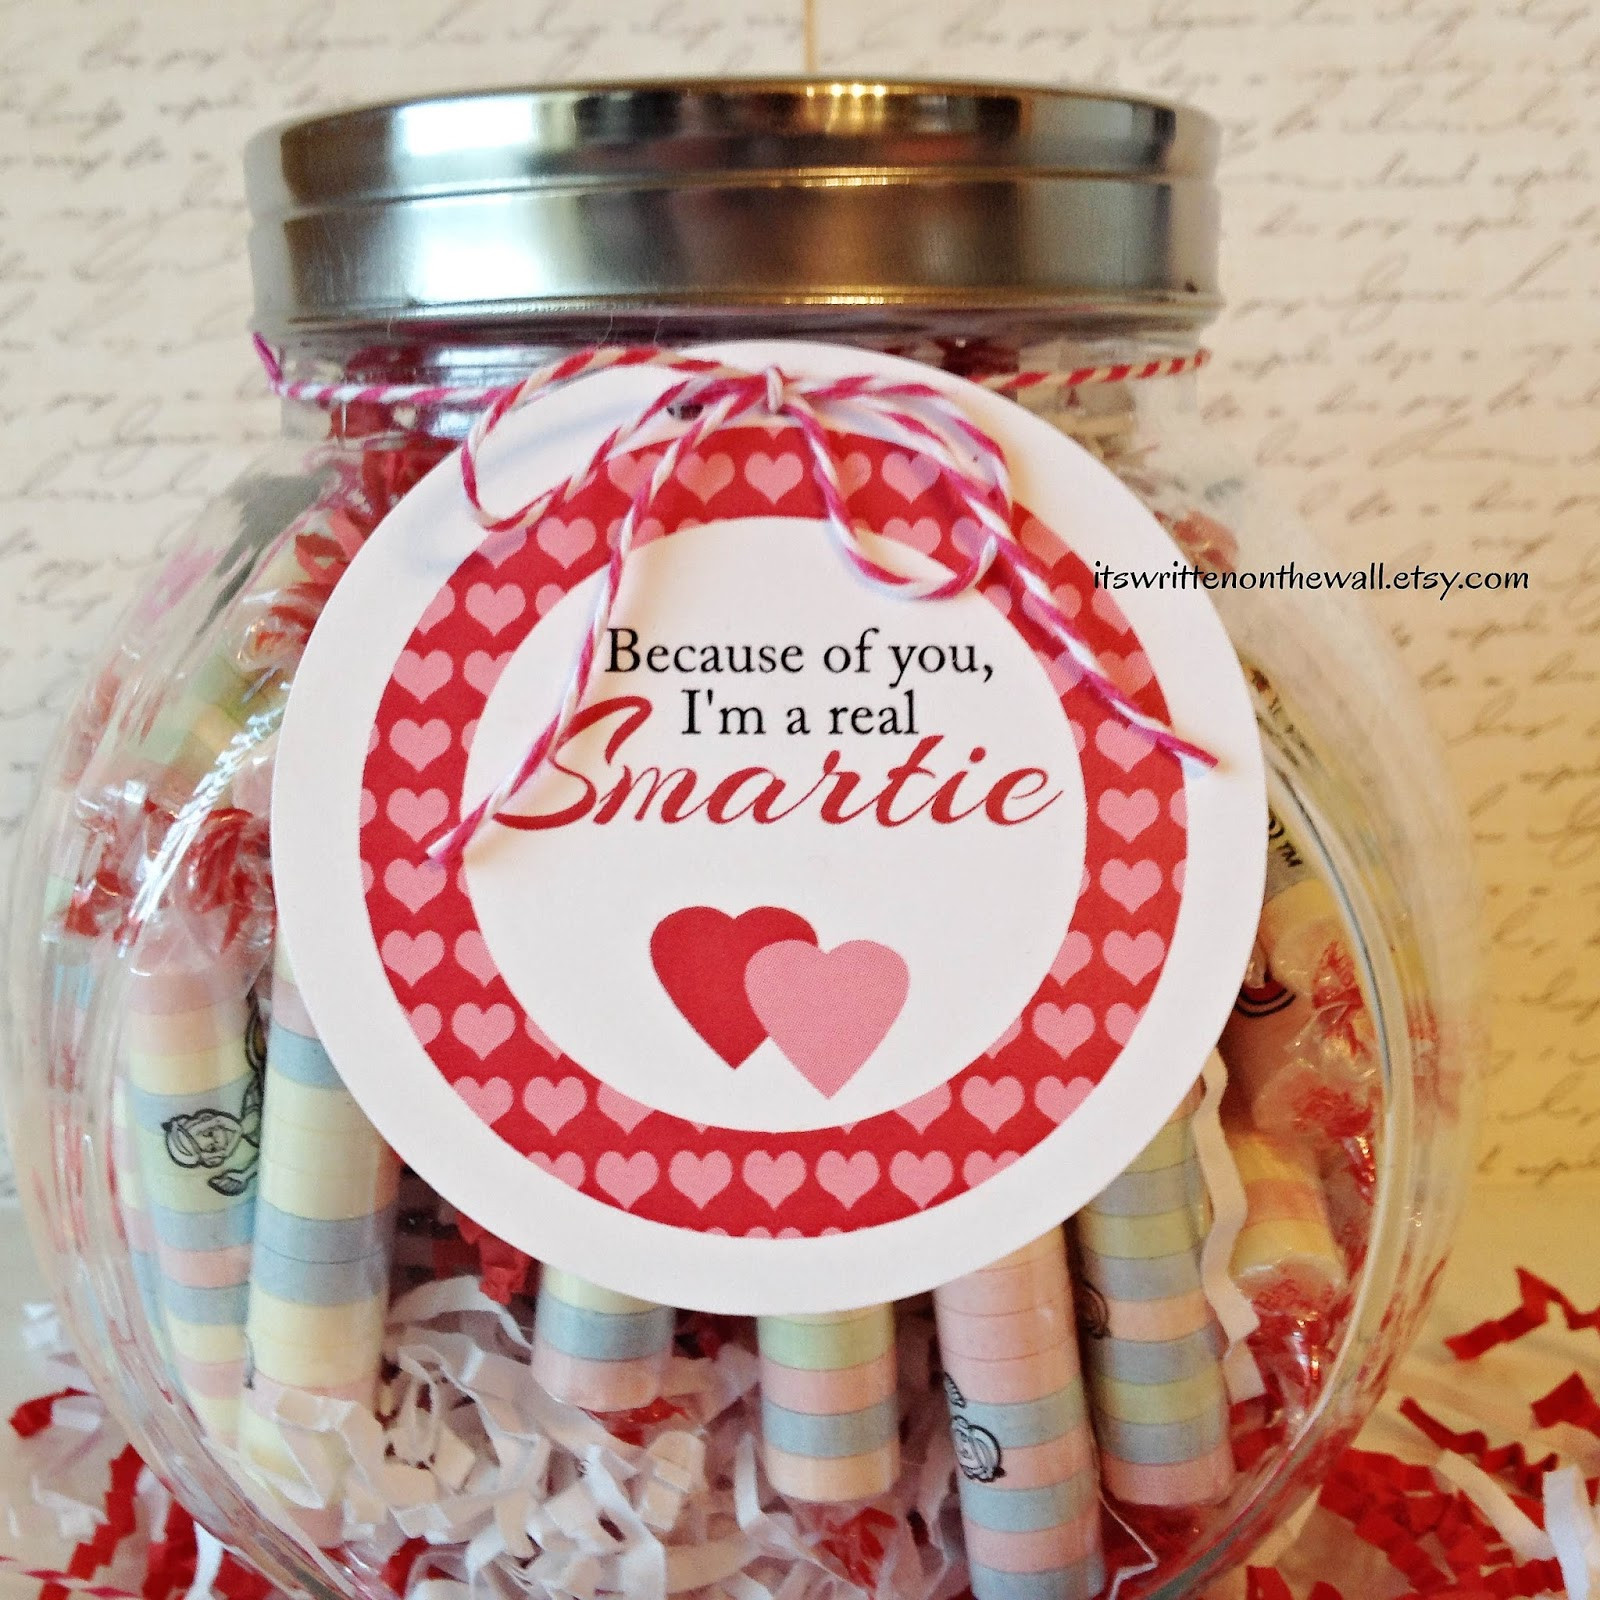 Valentine'S Day Teacher Gift Ideas
 It s Written on the Wall "Because of you I m a Smartie